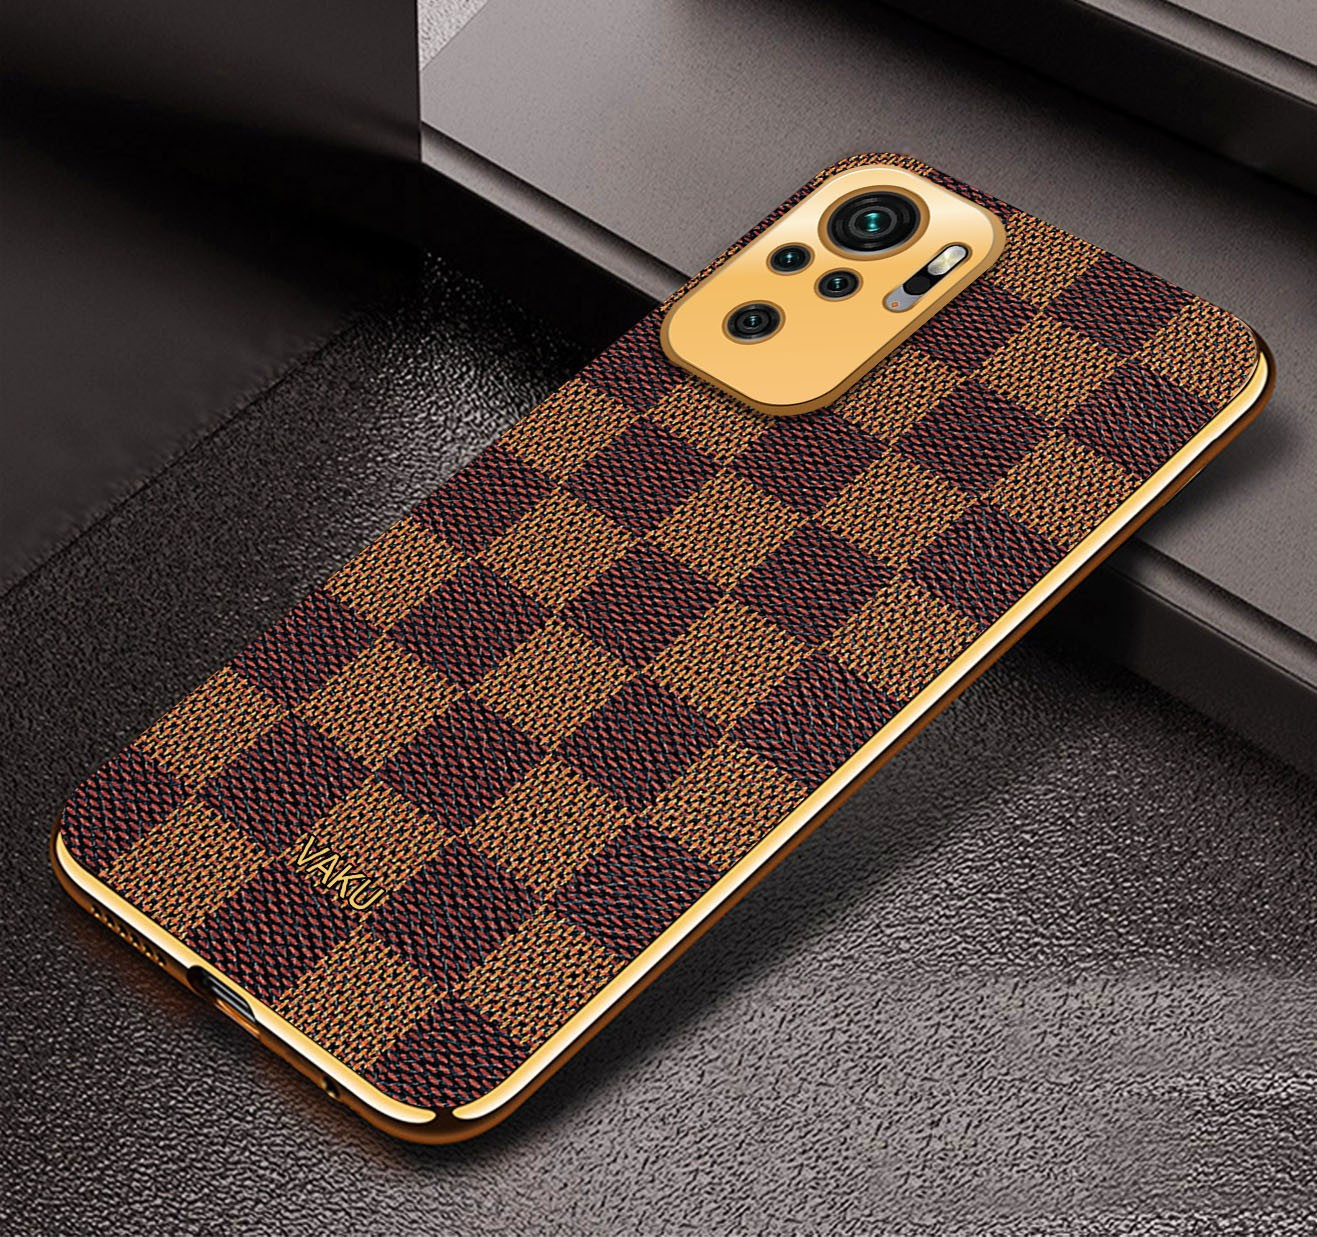 Vaku ® Redmi Note 10 Pro Max Cheron Series Leather Stitched Gold  Electroplated Soft TPU Back Cover - Redmi Note 10 Pro Max - Xiaomi - Mobile  / Tablet - Screen Guards India